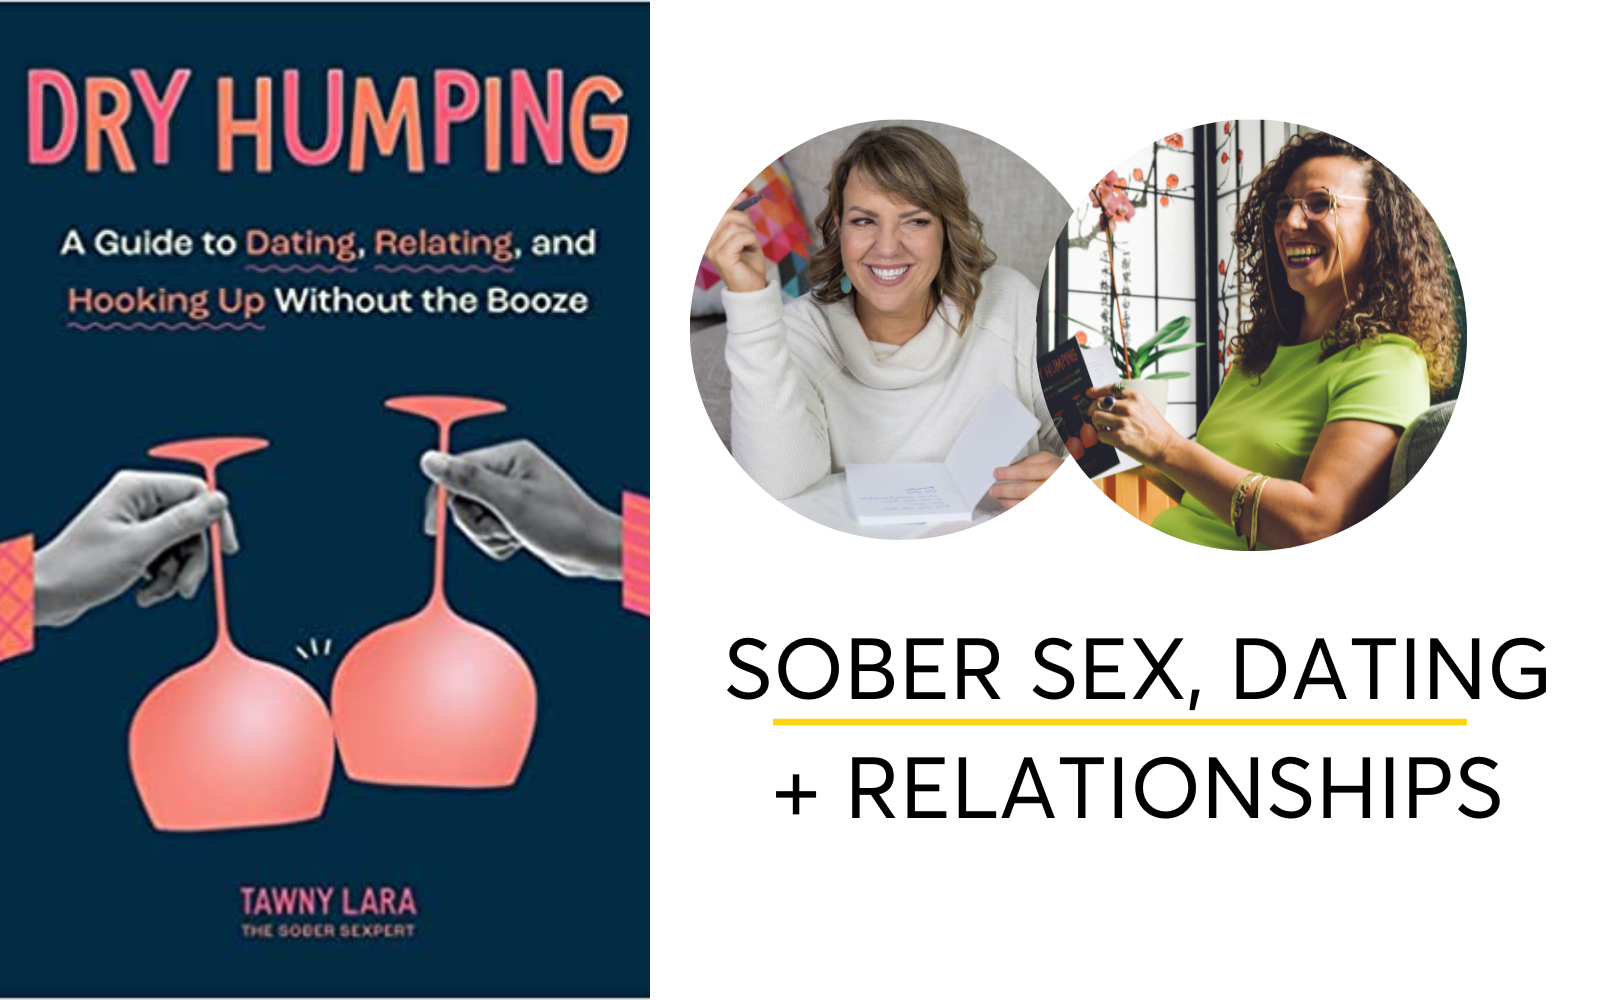 Sober Sex, Dating and Relationships